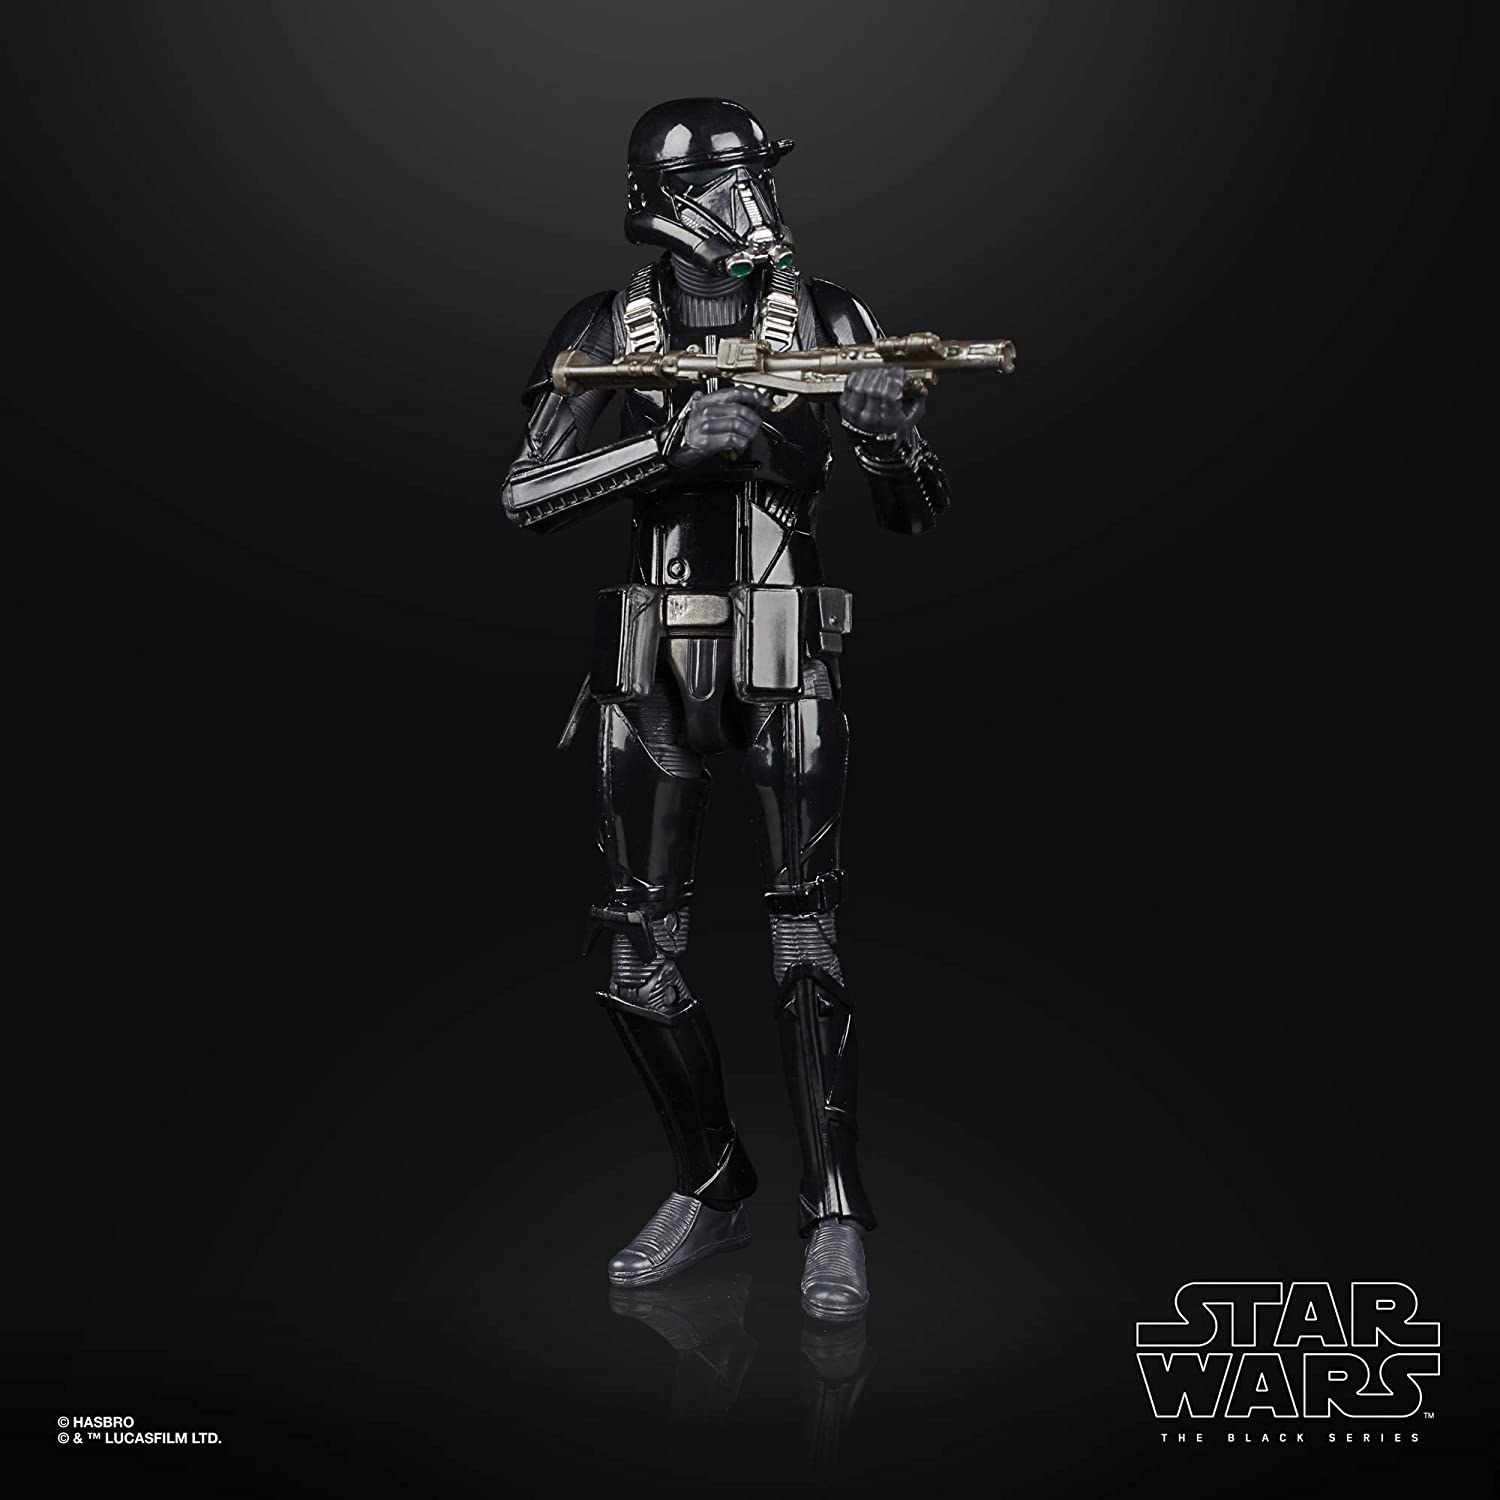 Star Wars The Black Series - Imperial Death Trooper Lucasfilm 50th Anniversary